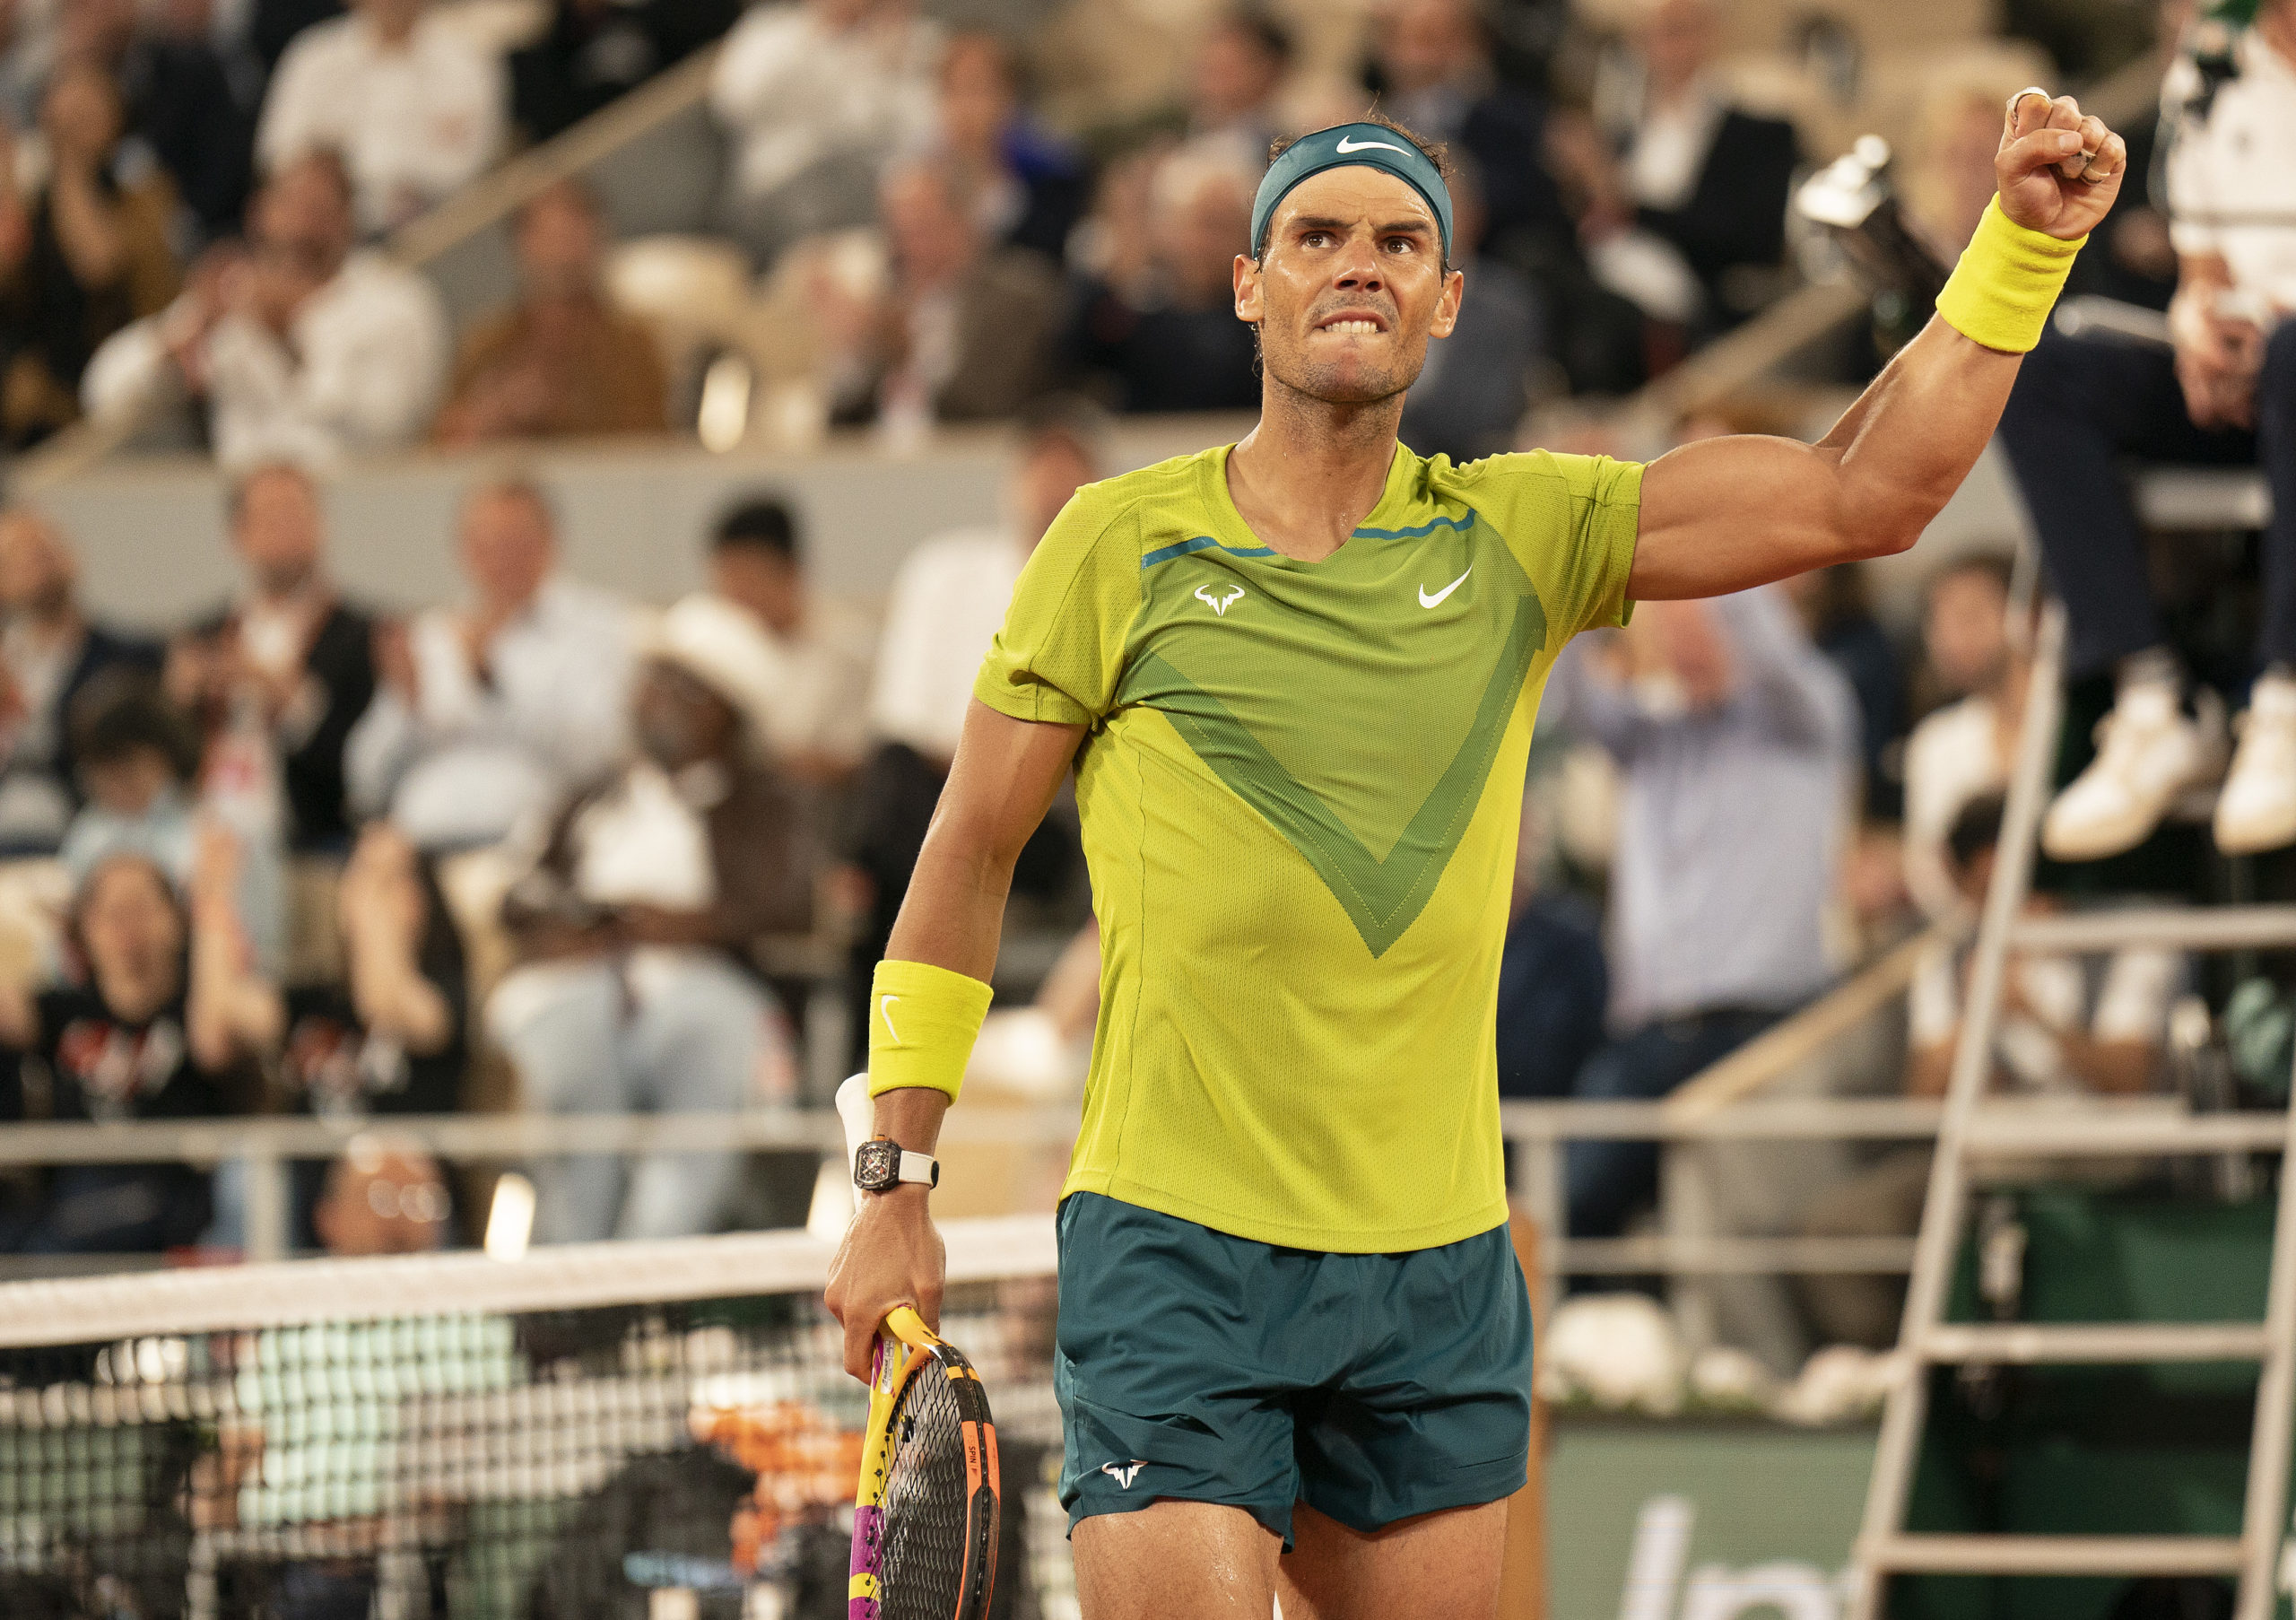 June 3, 2022; Paris, France; Rafael Nadal (ESP) reacts to a point during his semifinal match against Alexander Zverev (GER) on day 13 of the French Open at Stade Roland-Garros. Mandatory Credit: Susan Mullane-USA TODAY Sports